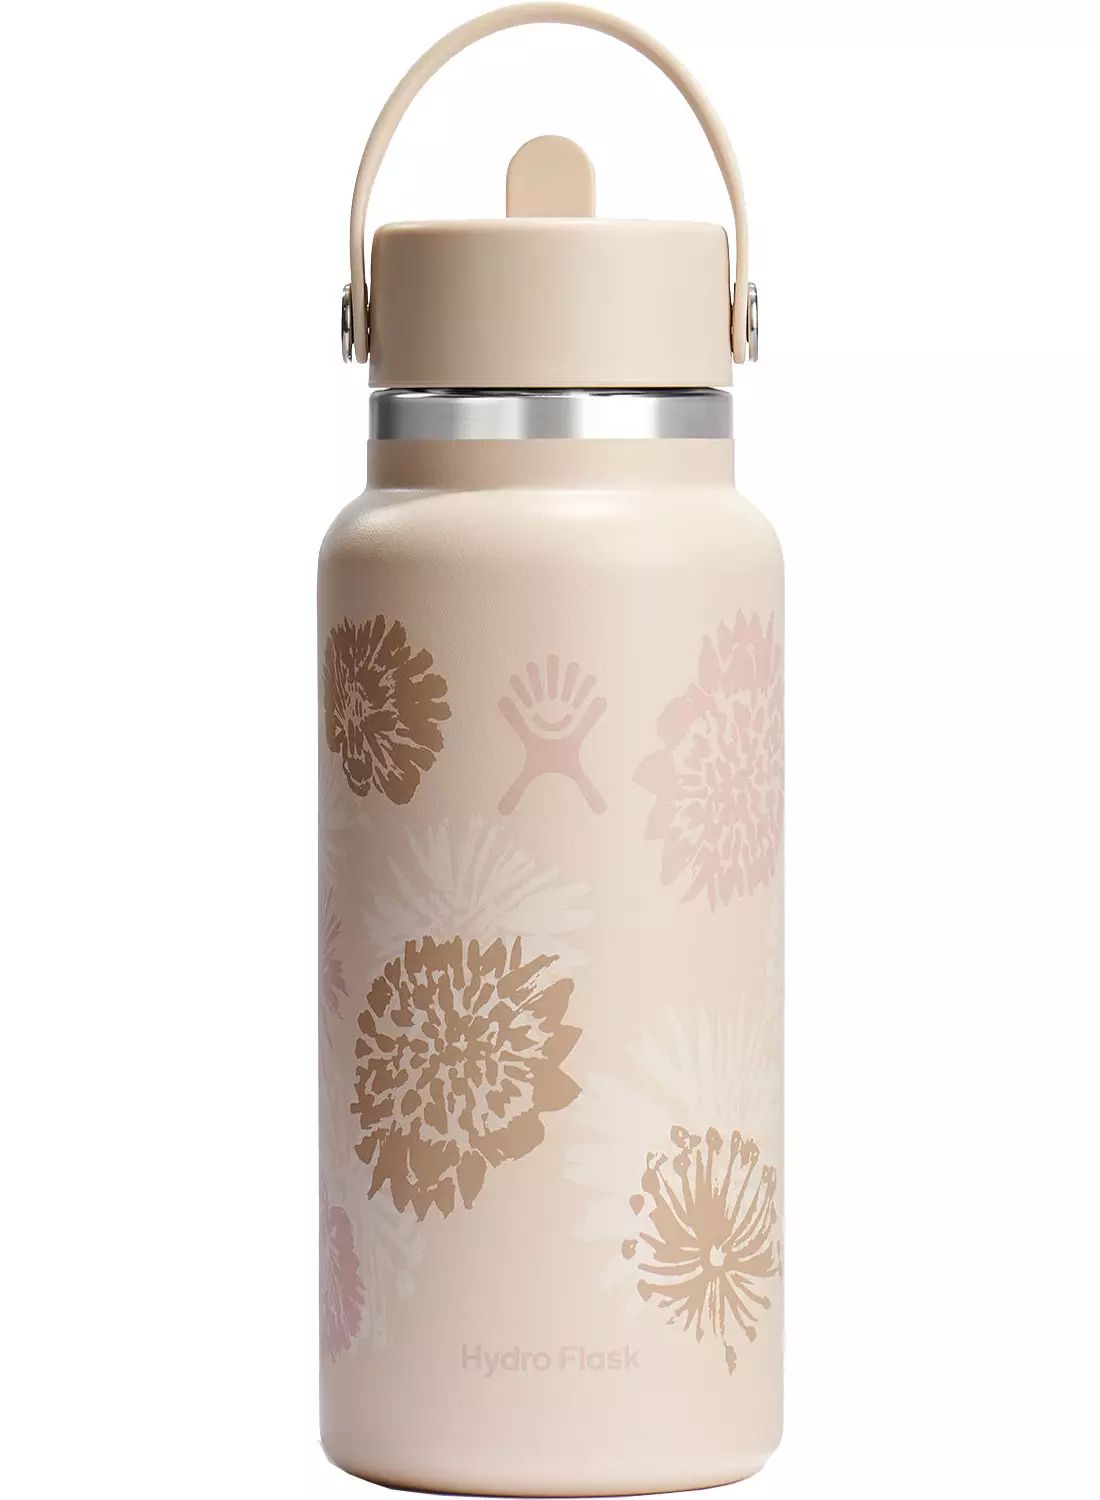 Hydro Flask 32 oz. Wide Mouth Bottle with Flex Straw Cap - Blossom Burst Collection | Dick's Spor... | Dick's Sporting Goods